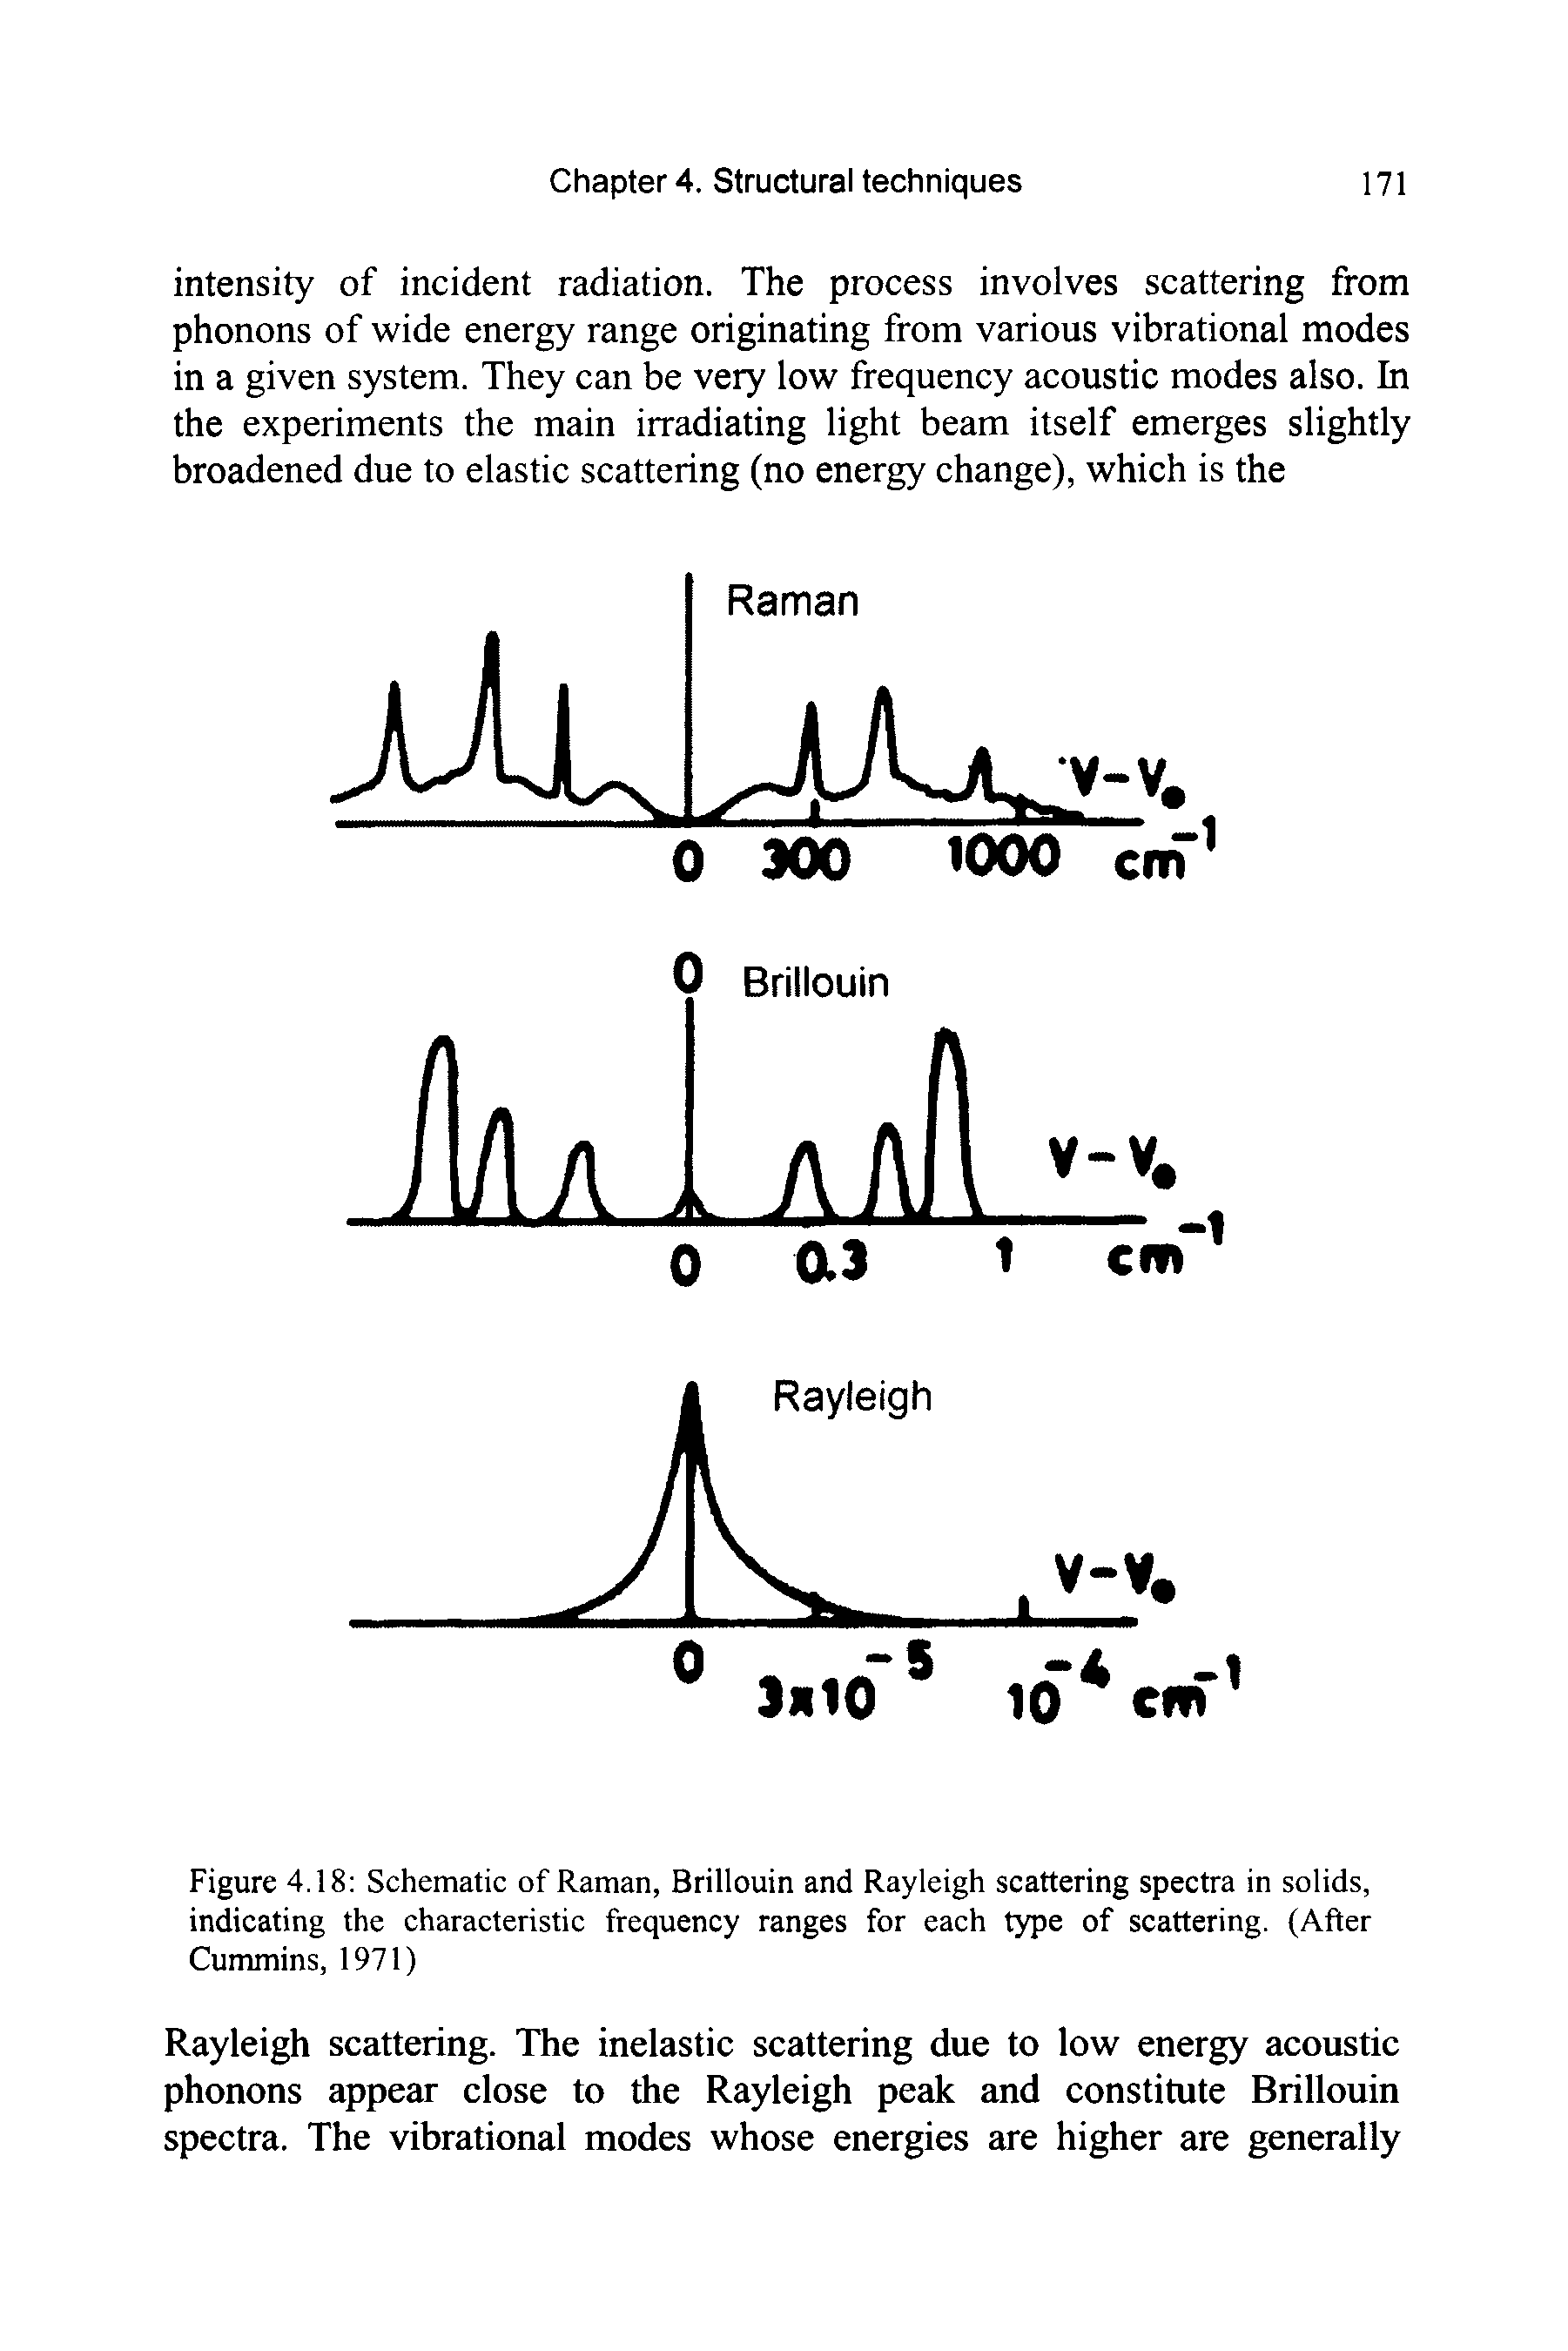 Figure 4.18 Schematic of Raman, Brillouin and Rayleigh scattering spectra in solids, indicating the characteristic frequency ranges for each type of scattering. (After Cummins, 1971)...